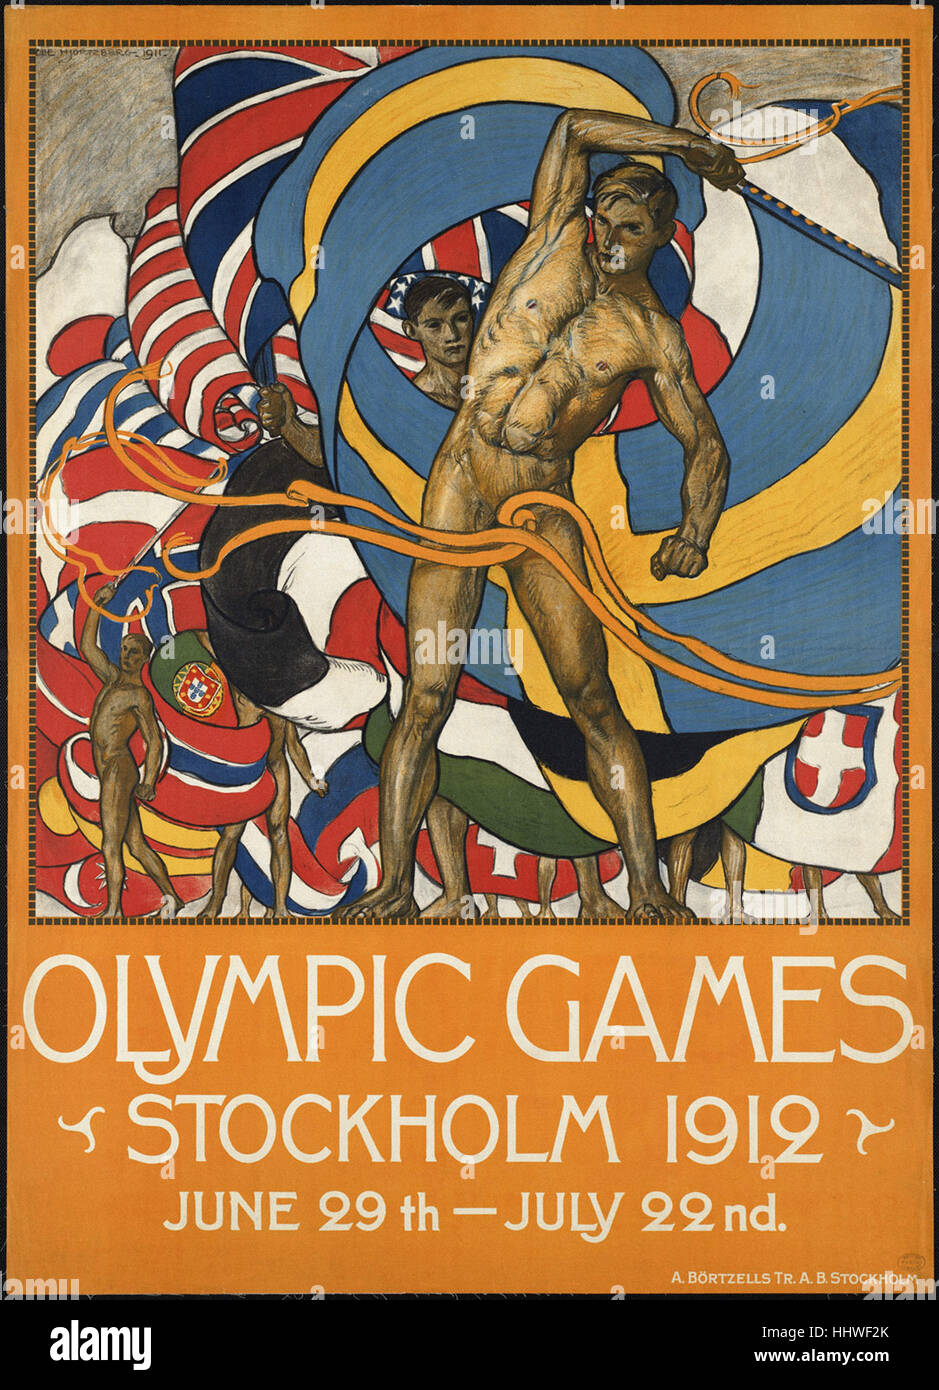 Olympic Games. Stockholm 1912  - Vintage travel poster 1920s-1940s Stock Photo